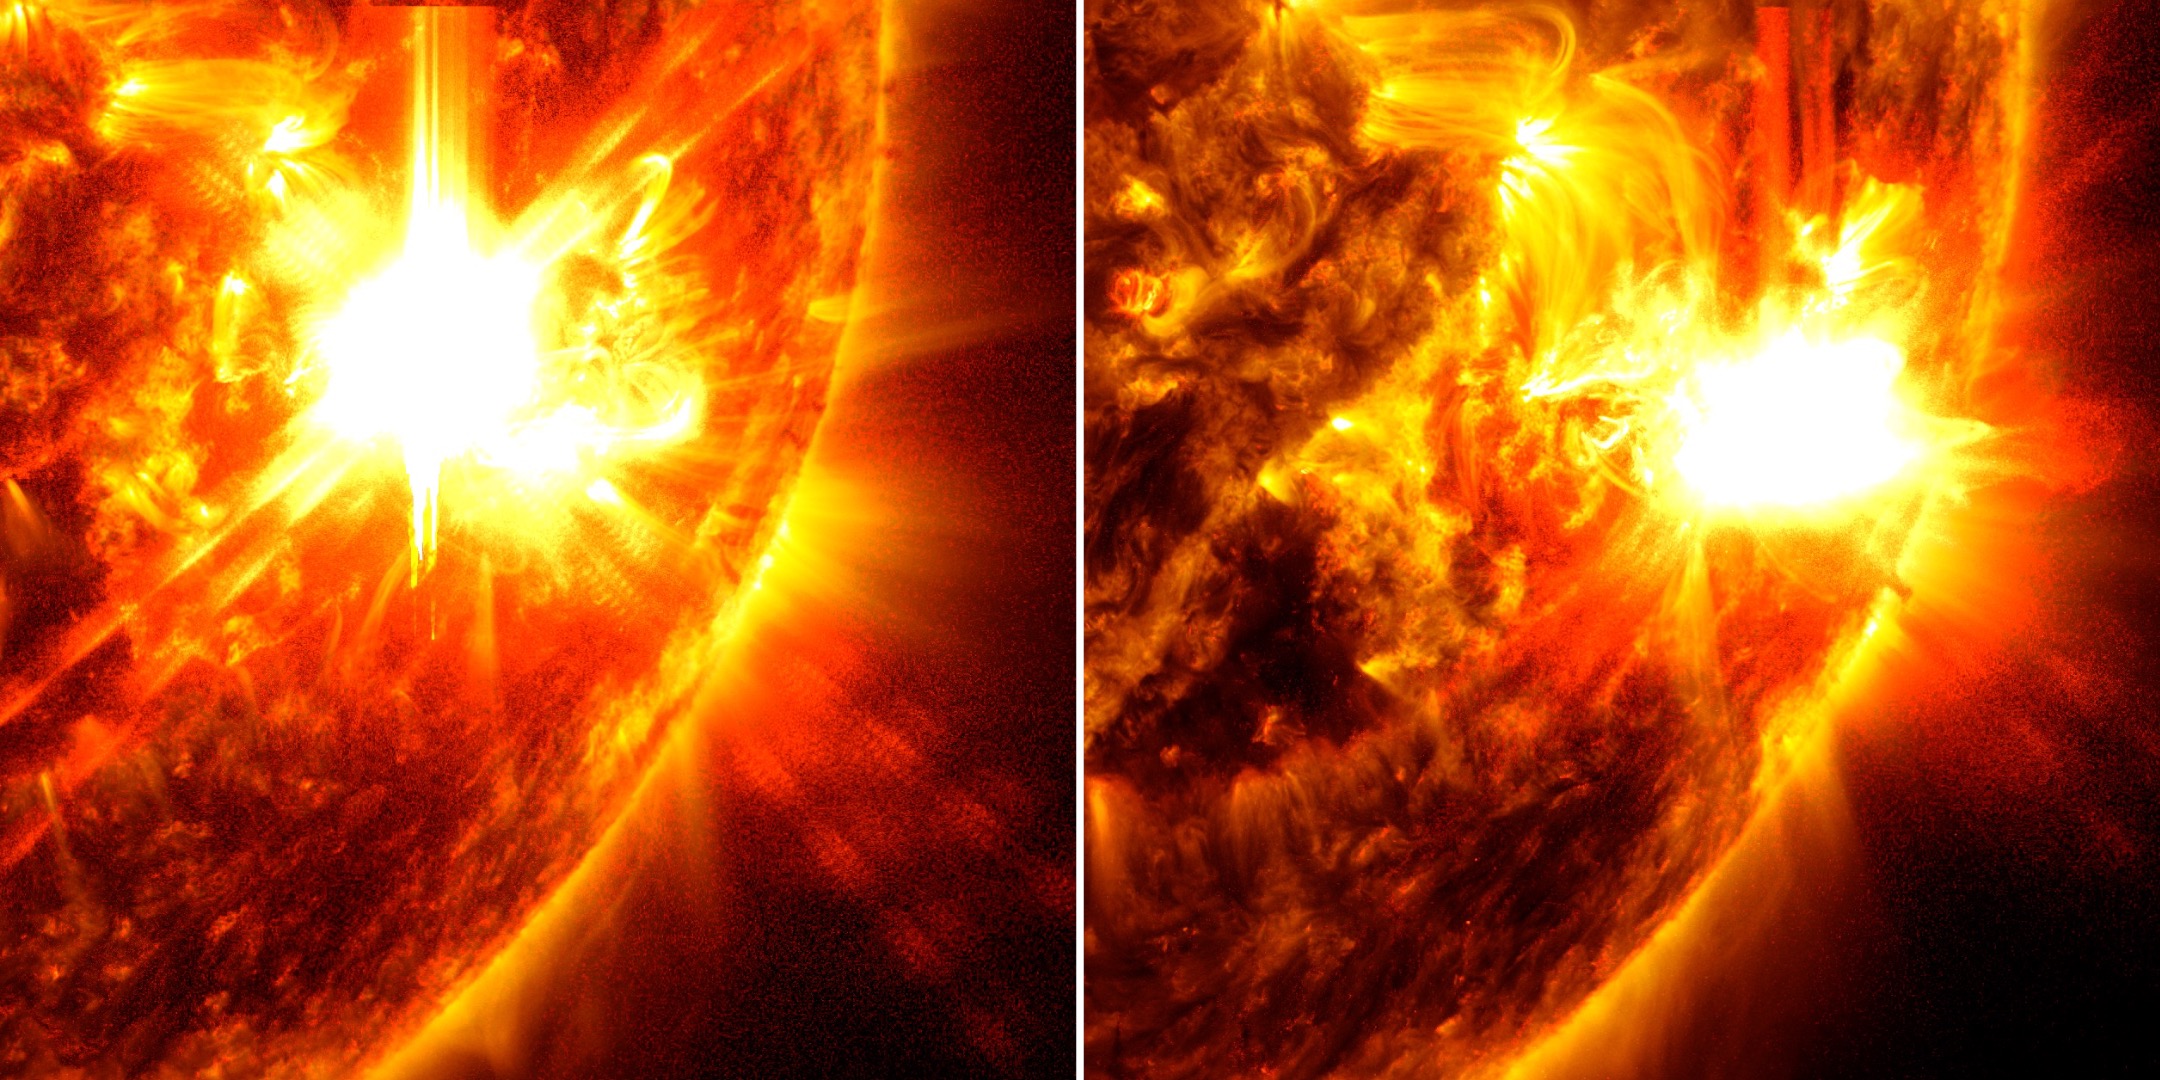 NASA’s Solar Dynamics Observatory captured images of the two solar flares on May 10 and May 11, 2024. The flares are classified as X5.8 and X1.5-class flares, respectively. The image shows a subset of extreme ultraviolet light that highlights the extremely hot material in flares created from a mixture of SDO’s AIA 193, 171 and 131 channels.  Available with EDT and UTC time labels as well as unlabeled.Credit: NASA/SDO